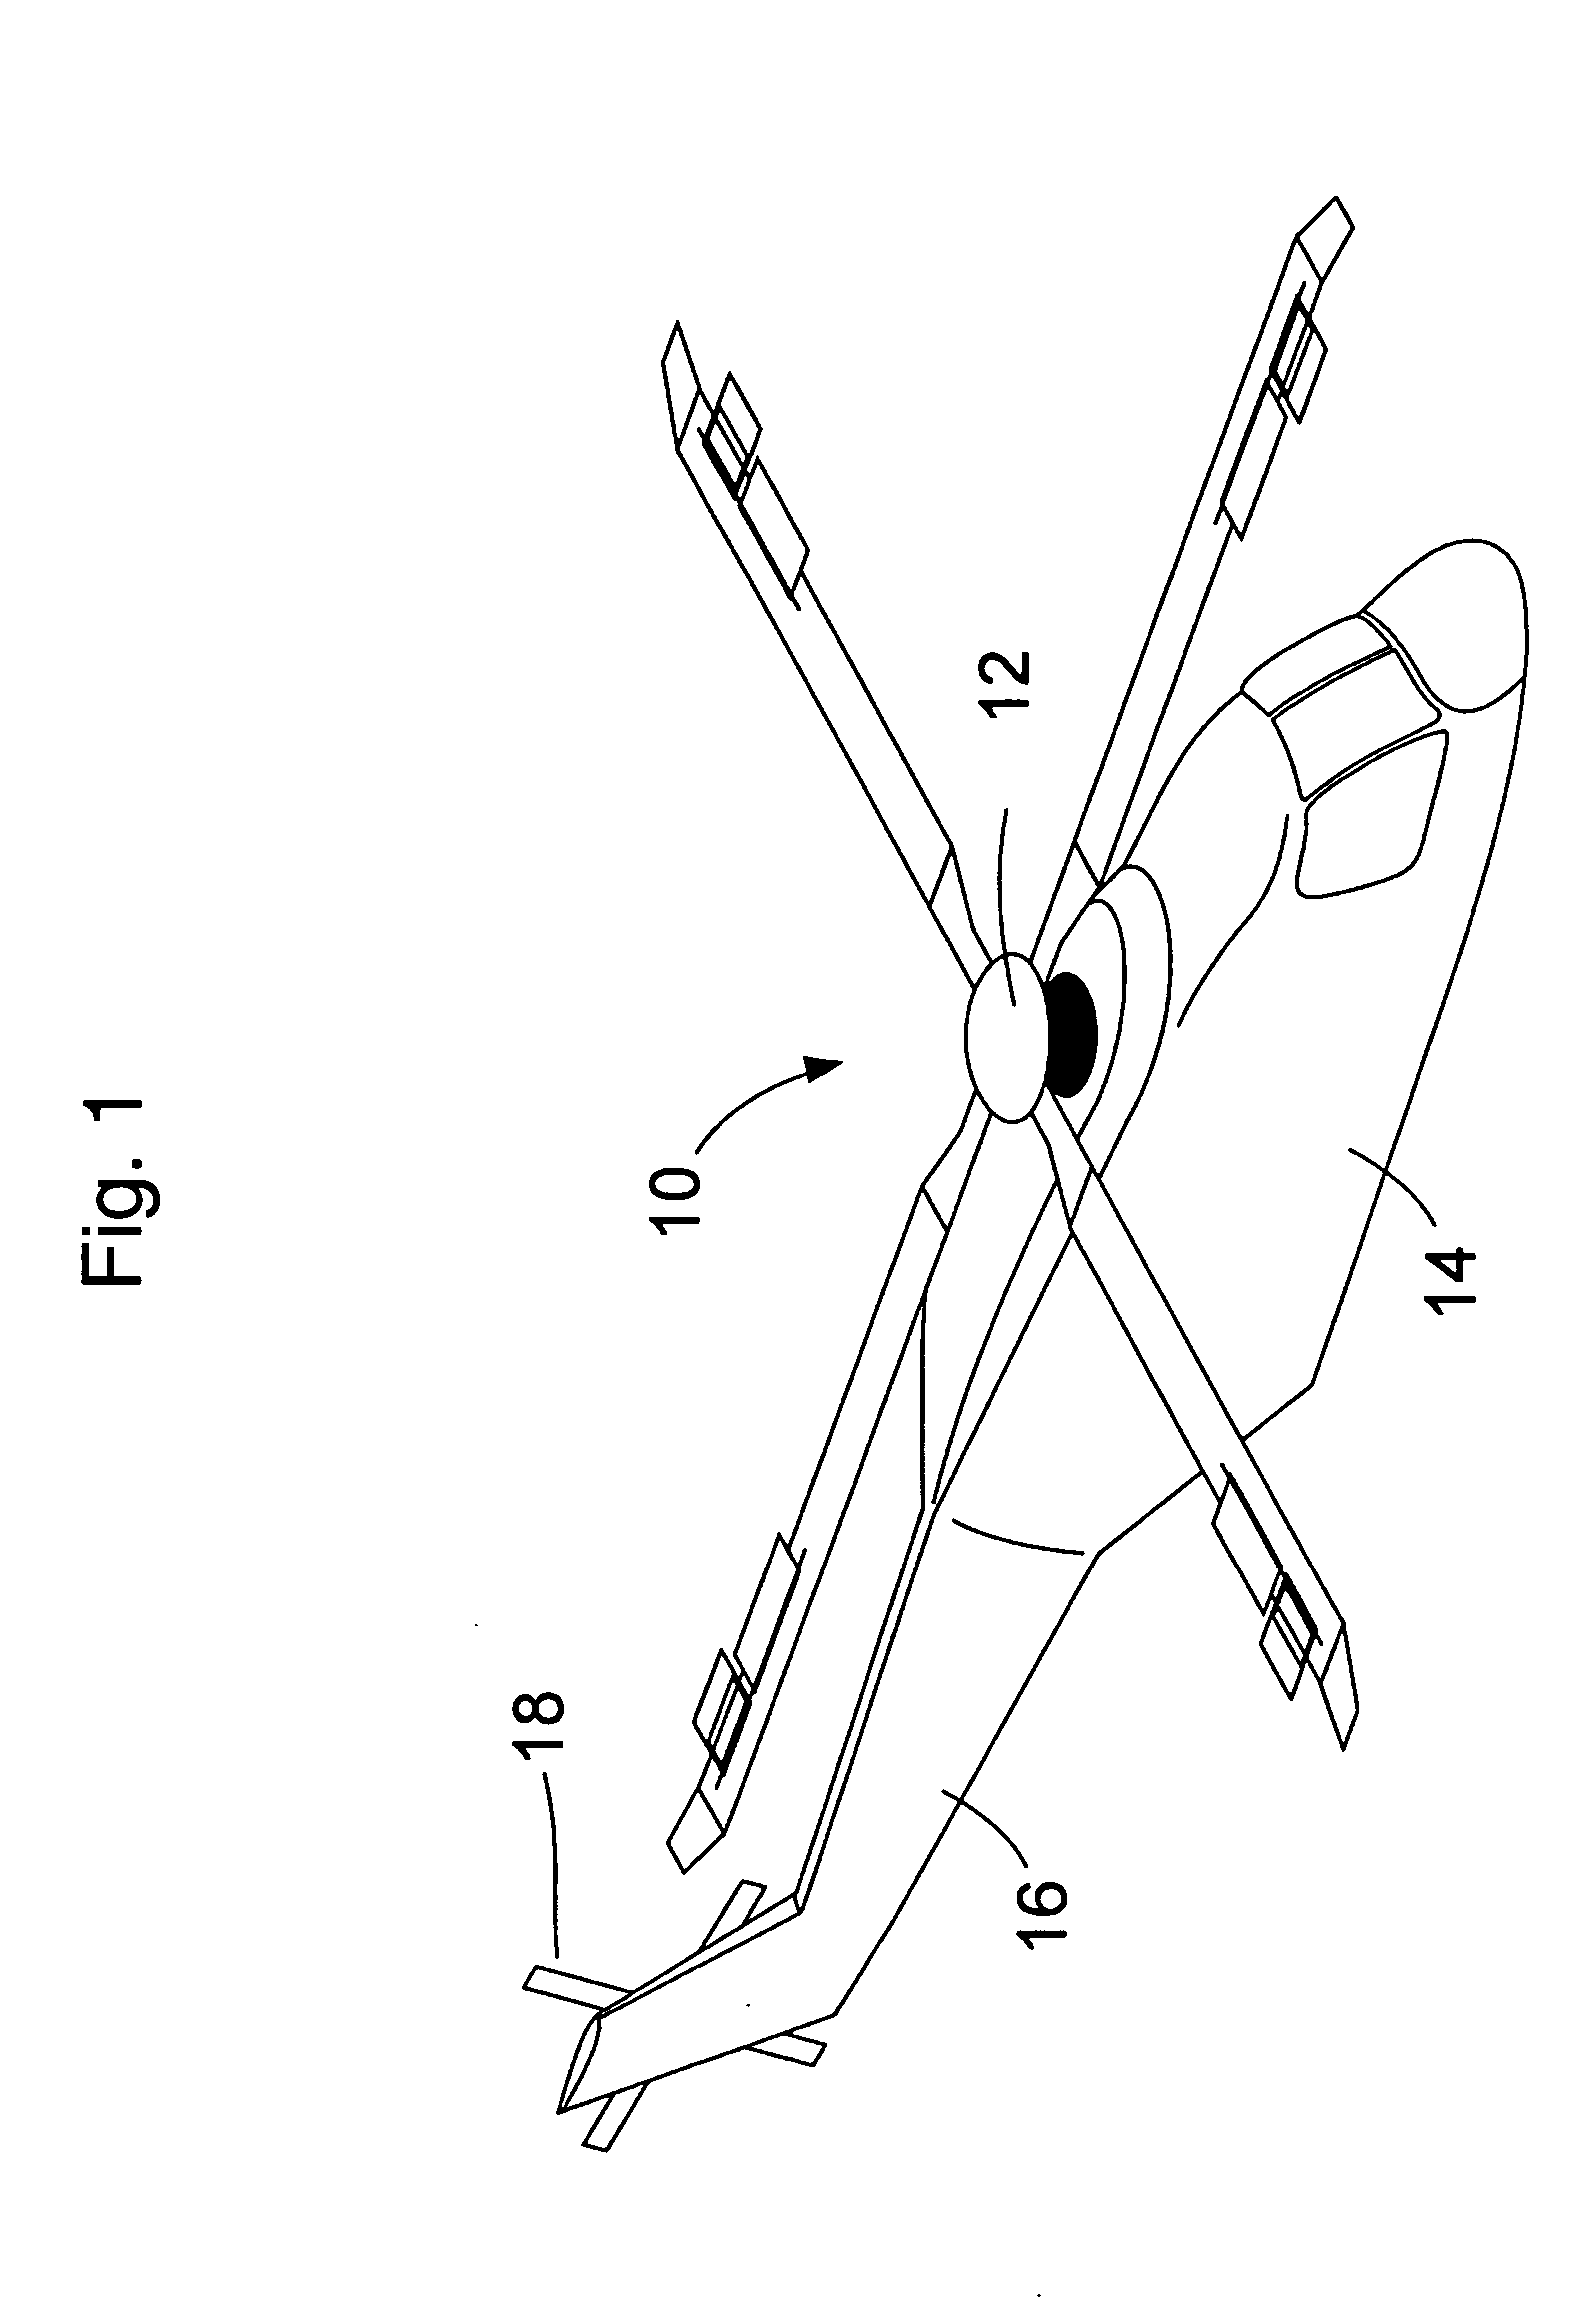 Rotor blade pitch control assembly